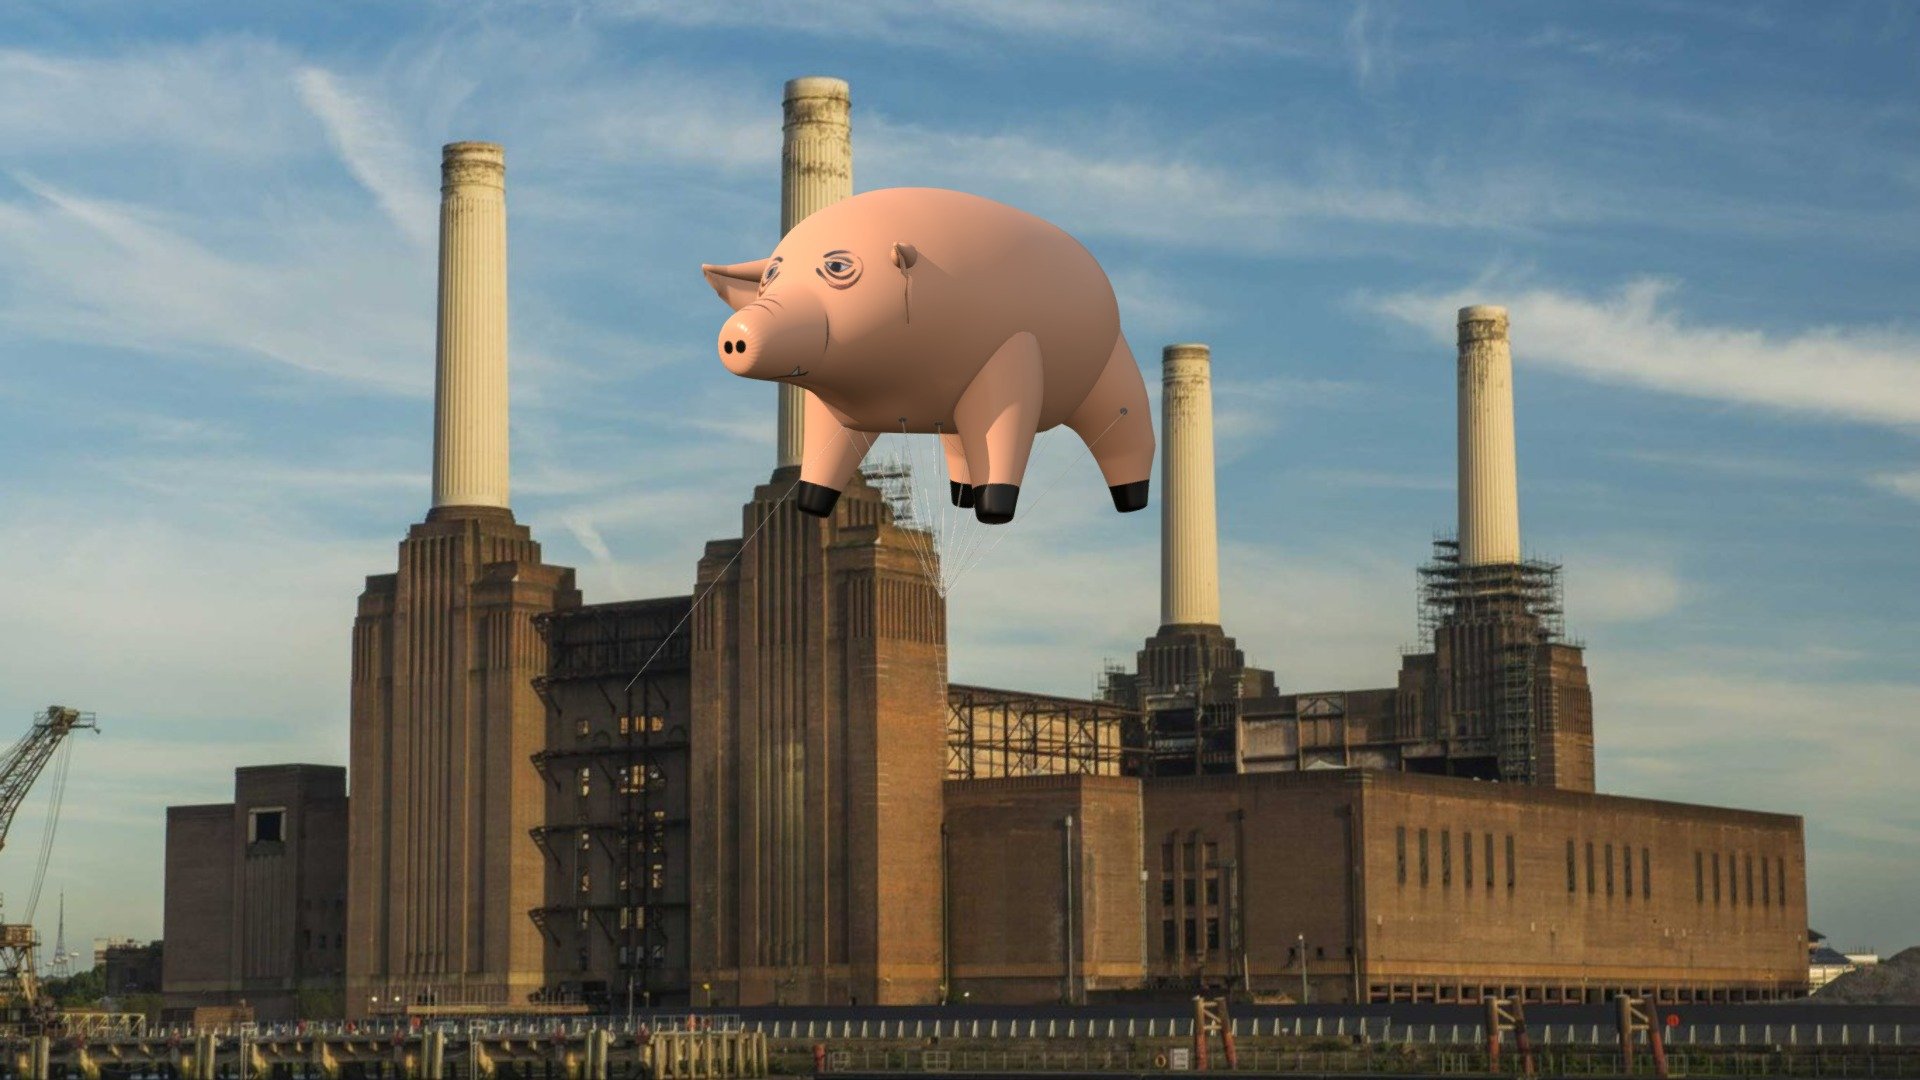 Inflatable flying pigs were one of the staple props of Pink Floyd's live shows. Pigs appeared numerous times in concerts by the band, promoting concerts and record releases, and on the cover of their 1977 album Animals.
The original Pink Floyd pig was designed by Roger Waters and built in December 1976 by the artist Jeffrey Shaw with help of design team Hipgnosis.[2]

On the second day, the marksman was not present because no one had told him to return. The pig broke free due to a strong gust of wind on the third day, gaining a lot of press coverage. It disappeared from sight within five minutes, and was spotted by airline pilots at thirty thousand feet in the air.[3] Flights at Heathrow Airport were cancelled as the huge inflatable pig flew through the path of aircraft, eastwards from Britain and out over the English Channel, finally landing on a rural farm in Kent that night.[3]

The pig that was originally floated above Battersea Power Station was called &ldquo;Algie